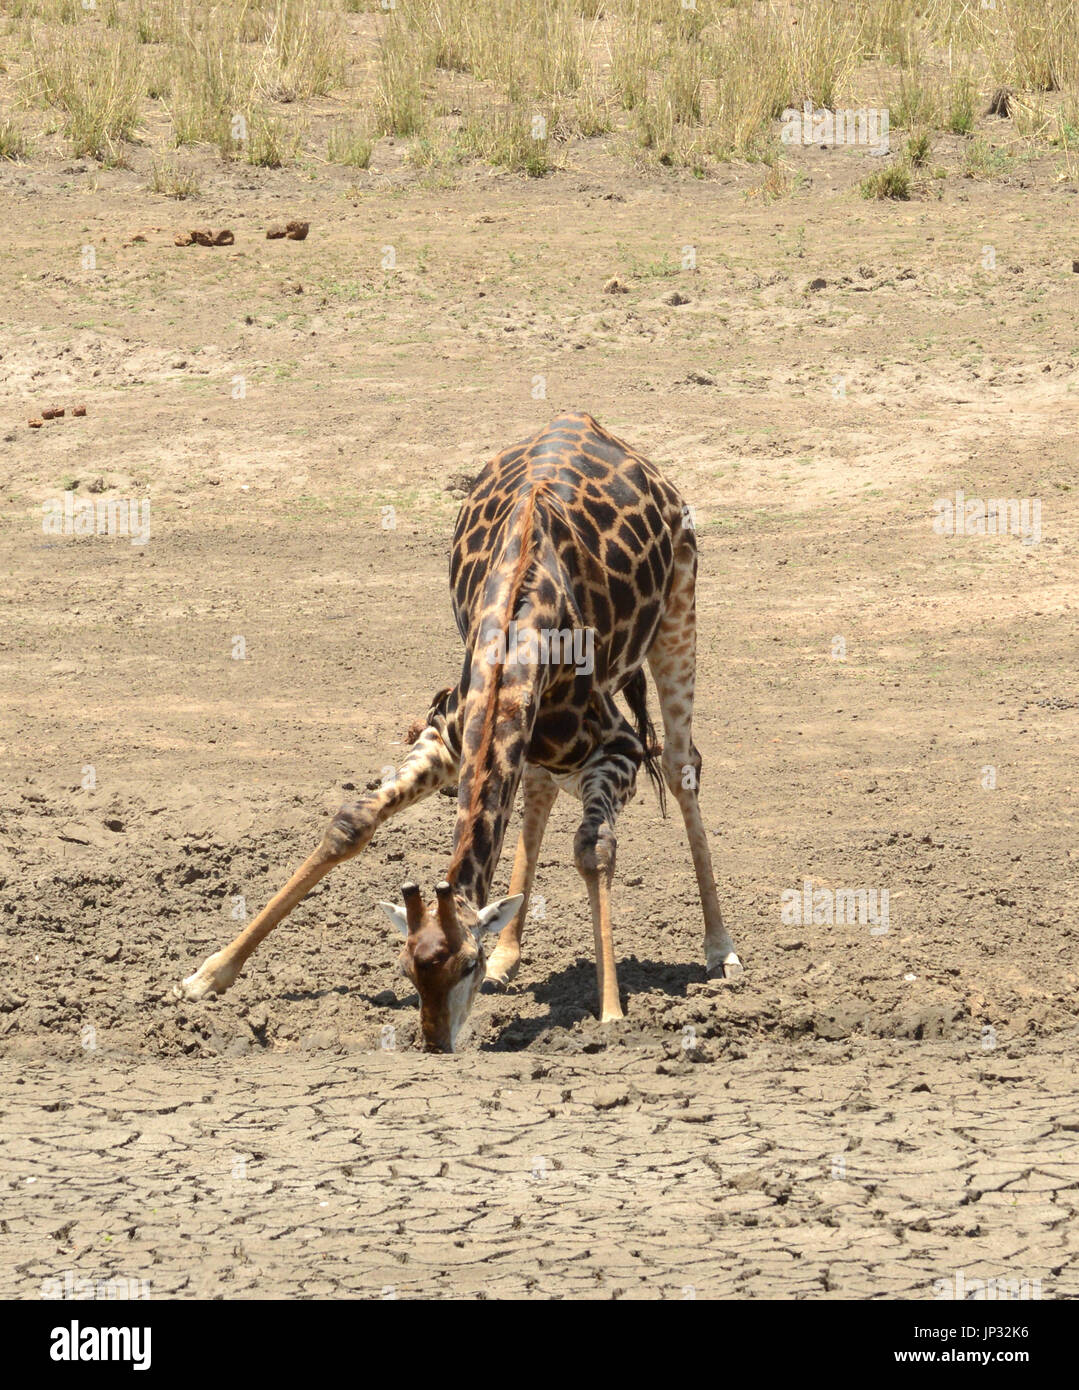 Giraffe trying to find water in the arid area of South Africa. Stock Photo